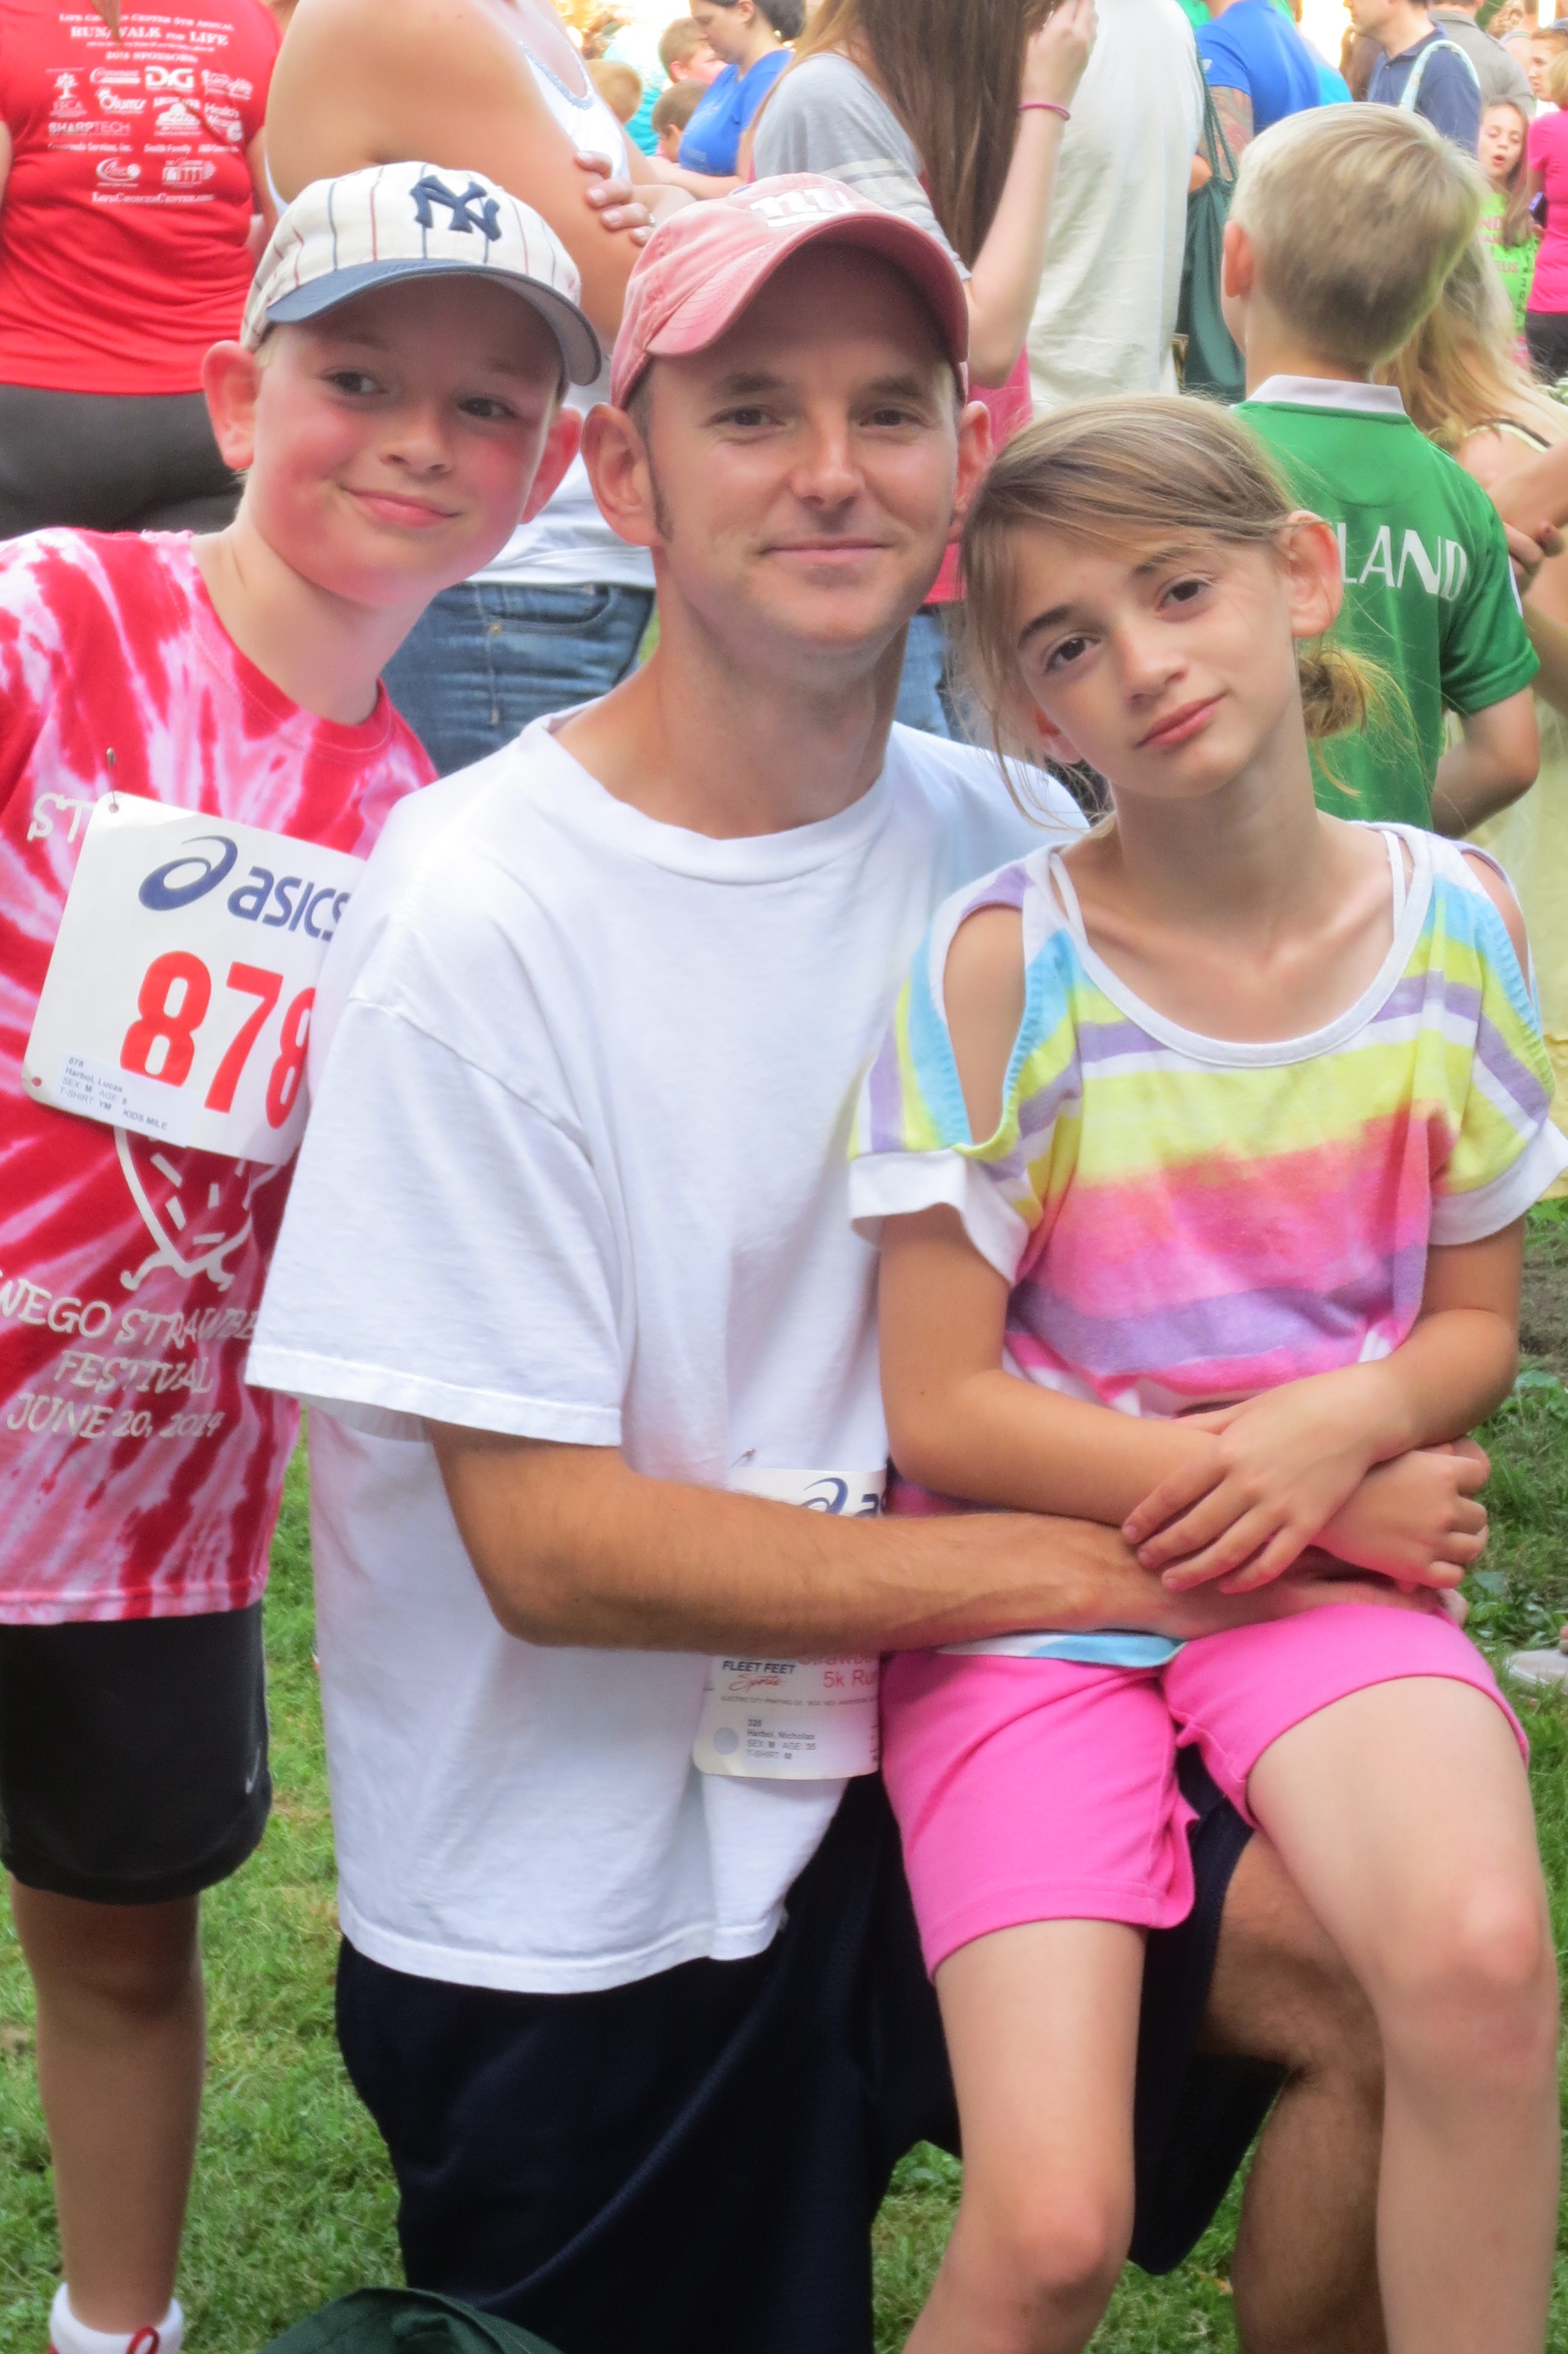 Parents and kids celebrate family bonds and healthy lifestyles at the Strawberry Shake 5K